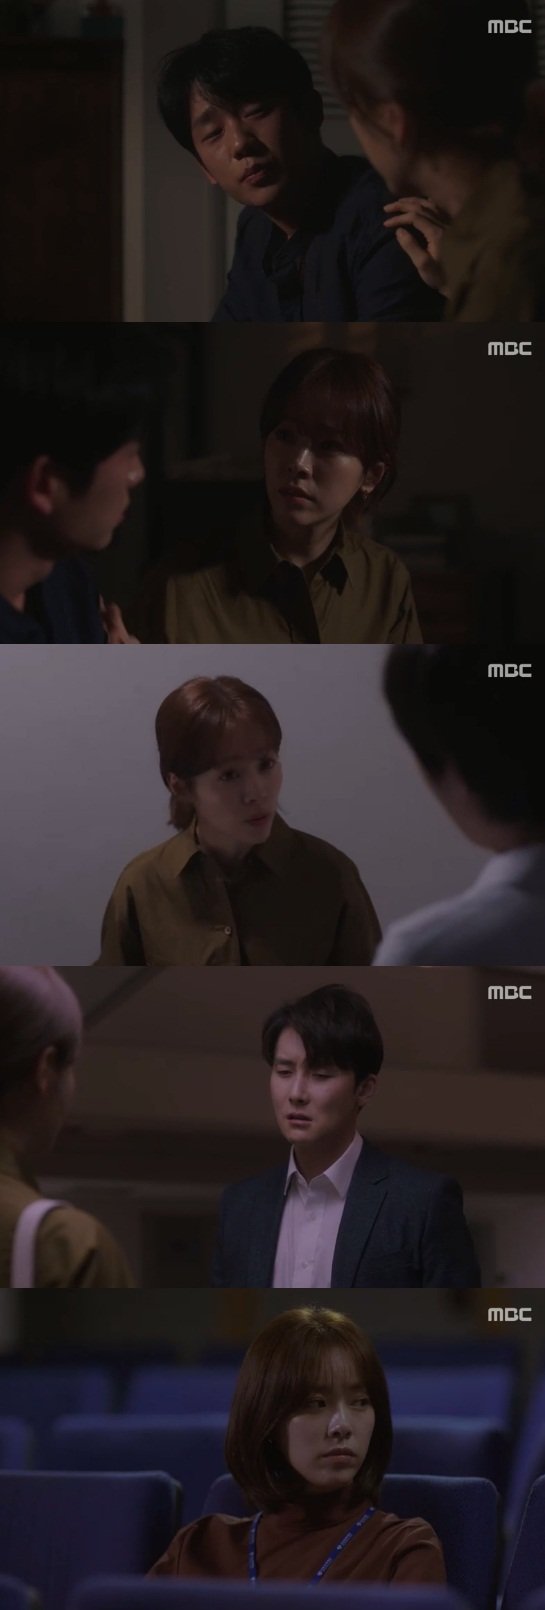 In the MBC drama Spring Night, which aired on the 10th, Jung Hae-in (Yu JiHo) was shown to be distressed when he heard the story of his son Haians mother.My mother was living in a family after remarriage after breaking up with Jeong Hae-in early on.Jeong Hae-in, whose wounds were betrayed were staying deep in his heart, was drunk and told Han Ji-min (Lee Jung-in): Will Jung-in leave us? Can I believe it?I asked if I could trust it, is it changing? I shook my head, saying I dont know to Han Ji-min, who replied that it wont change.Han Ji-min questioned the anxiety of Jeong Hae-in and found that the reason was because of Haians mother. Han Ji-min, who had complicated his thoughts, went home.I met Kim Joonhan (Kwon Gi-seok) who was waiting in front of the house and said, I betrayed once and can I meet again.And yet can you trust me? asked Kim Joonhan, who replied, I can trust you and Han Ji-mins thoughts became more complicated.The next day, Han Ji-min sat face to face with his friend Lee Sang-hee (Song Young-joo) and said, I can not clean up.(Mr. JiHo said that he had not forgotten Jung Eun-woos mother yet.) He said that he believes me, but Mr. JiHo said he does not believe me.I think I was just in front of my eyes right now. 